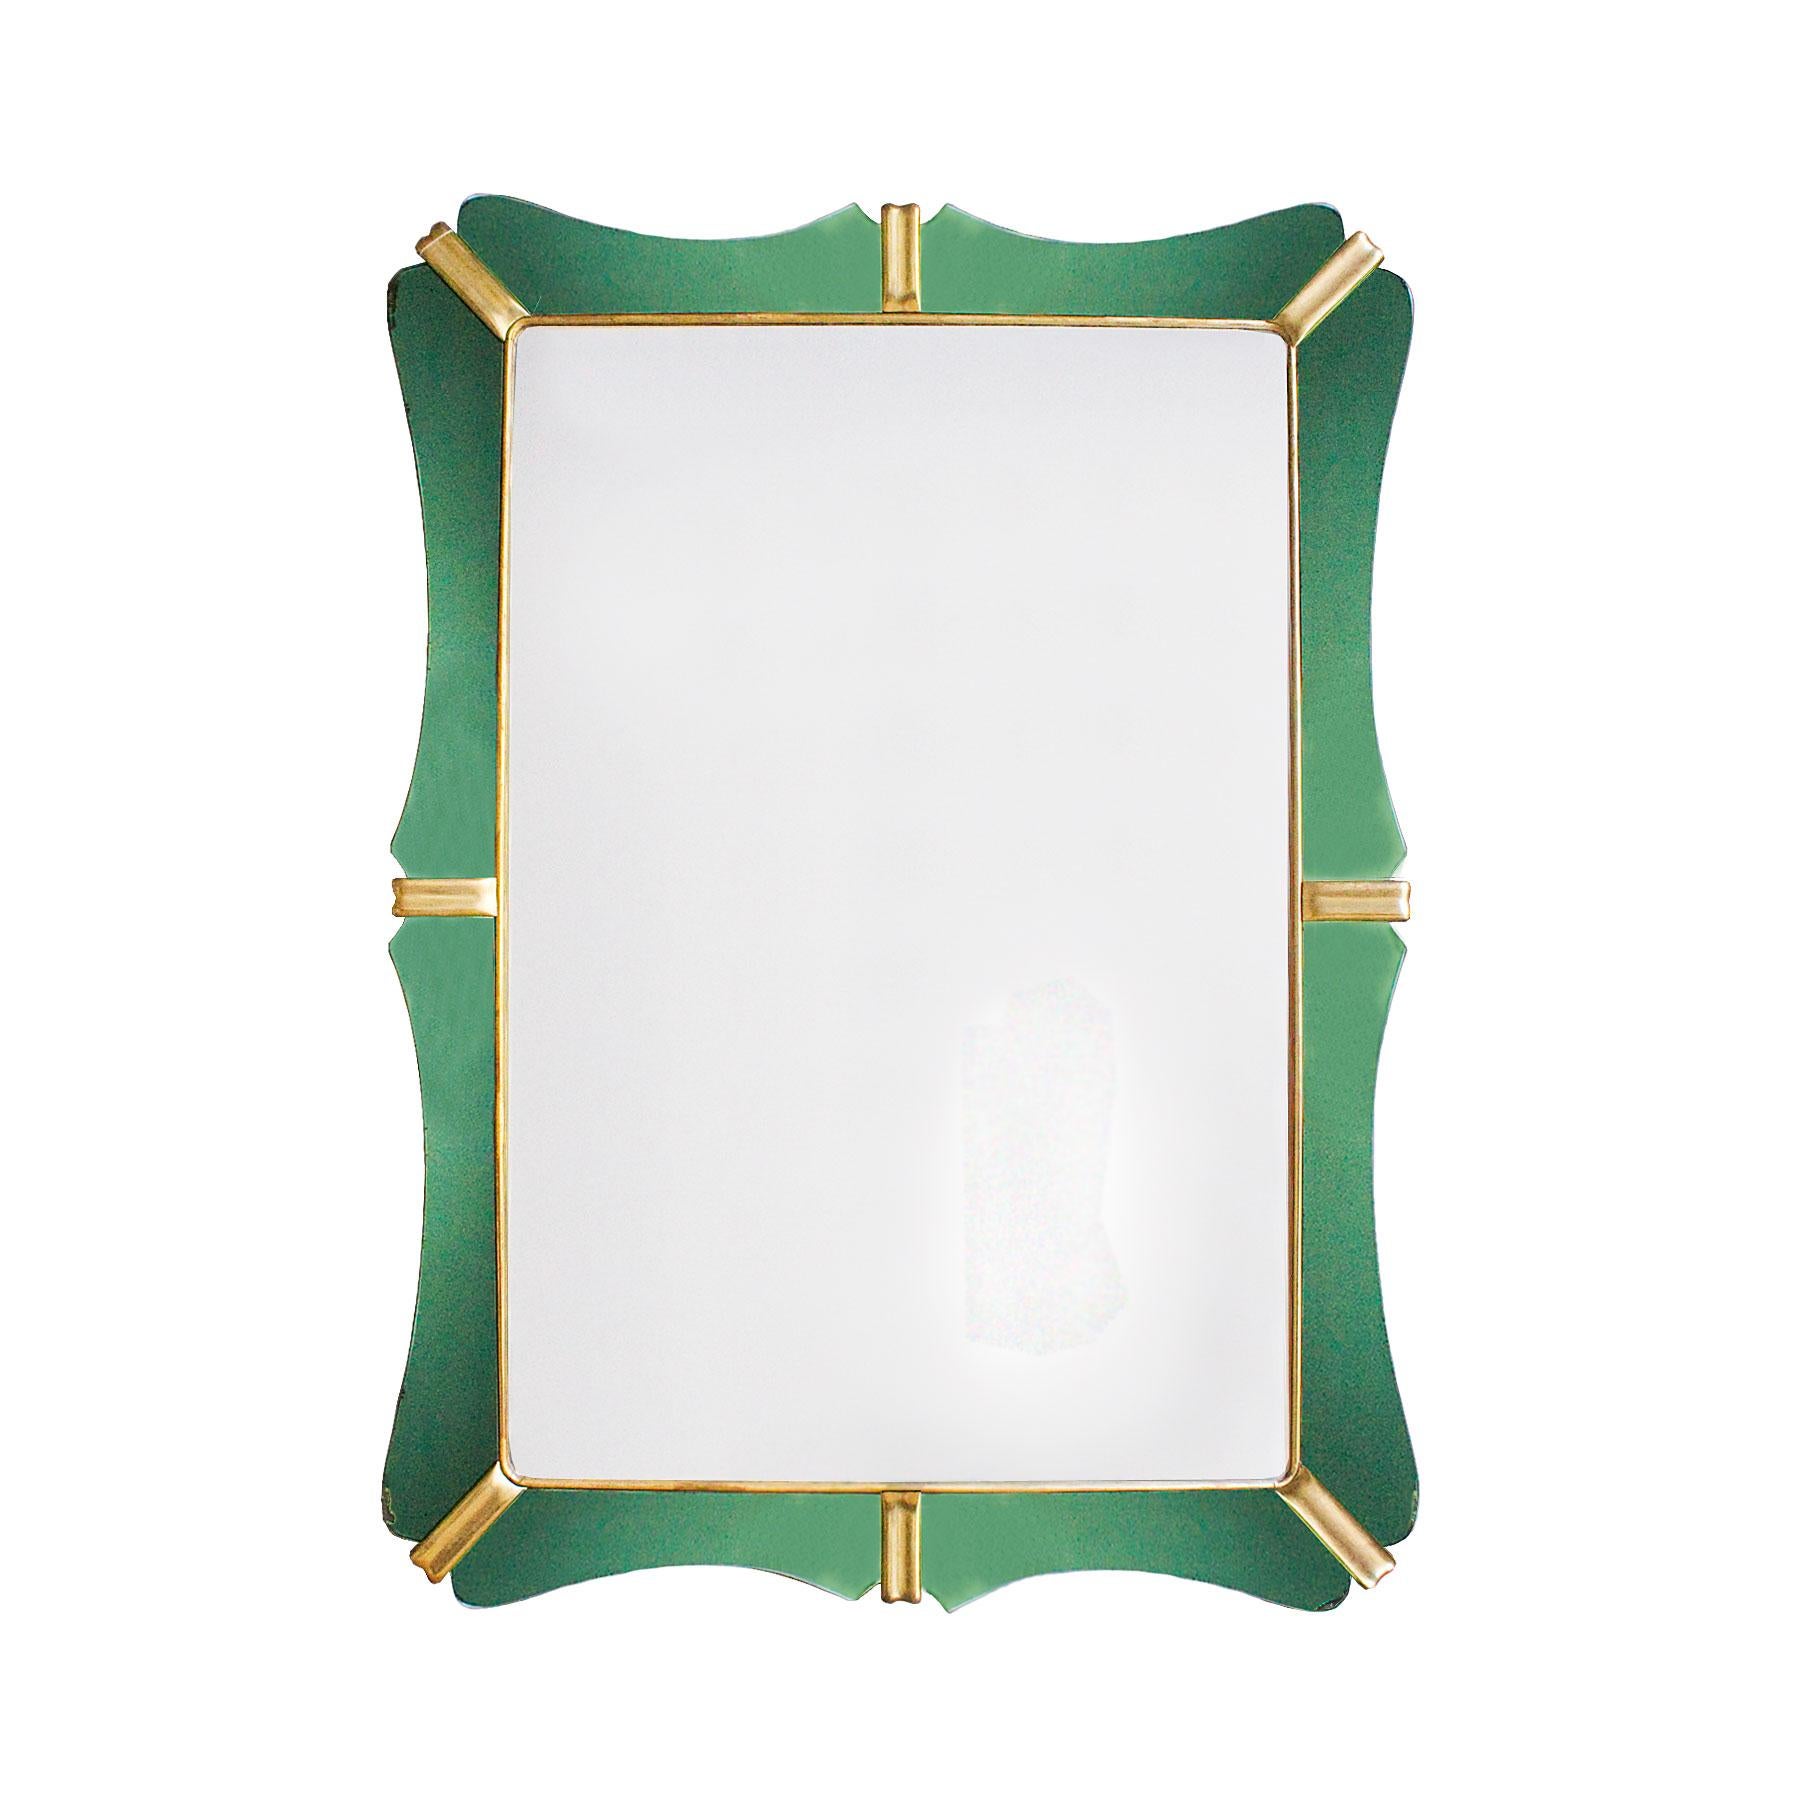 Large mirror, wood structure, eight green mirrors frame, golden leaf wood in between and inner frame, some oxidation.

Italy, circa 1950.